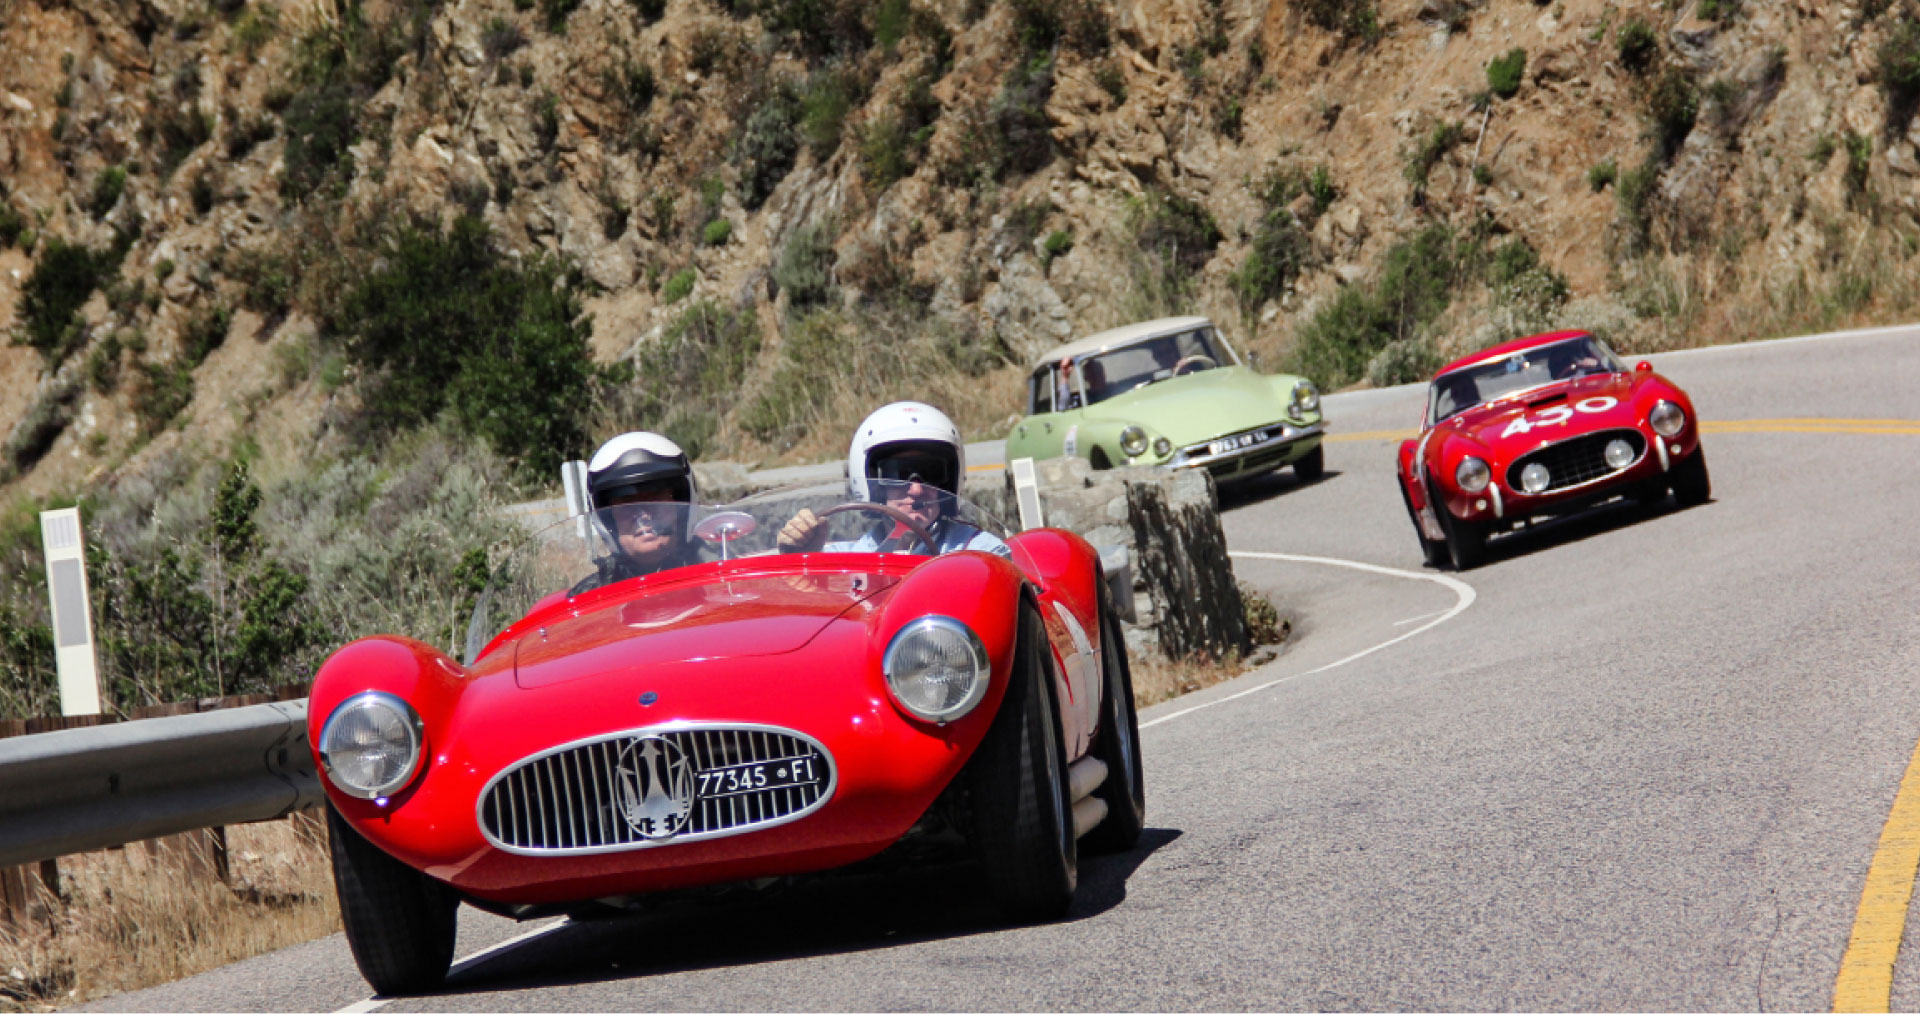 Behind the wheel of the California Mille